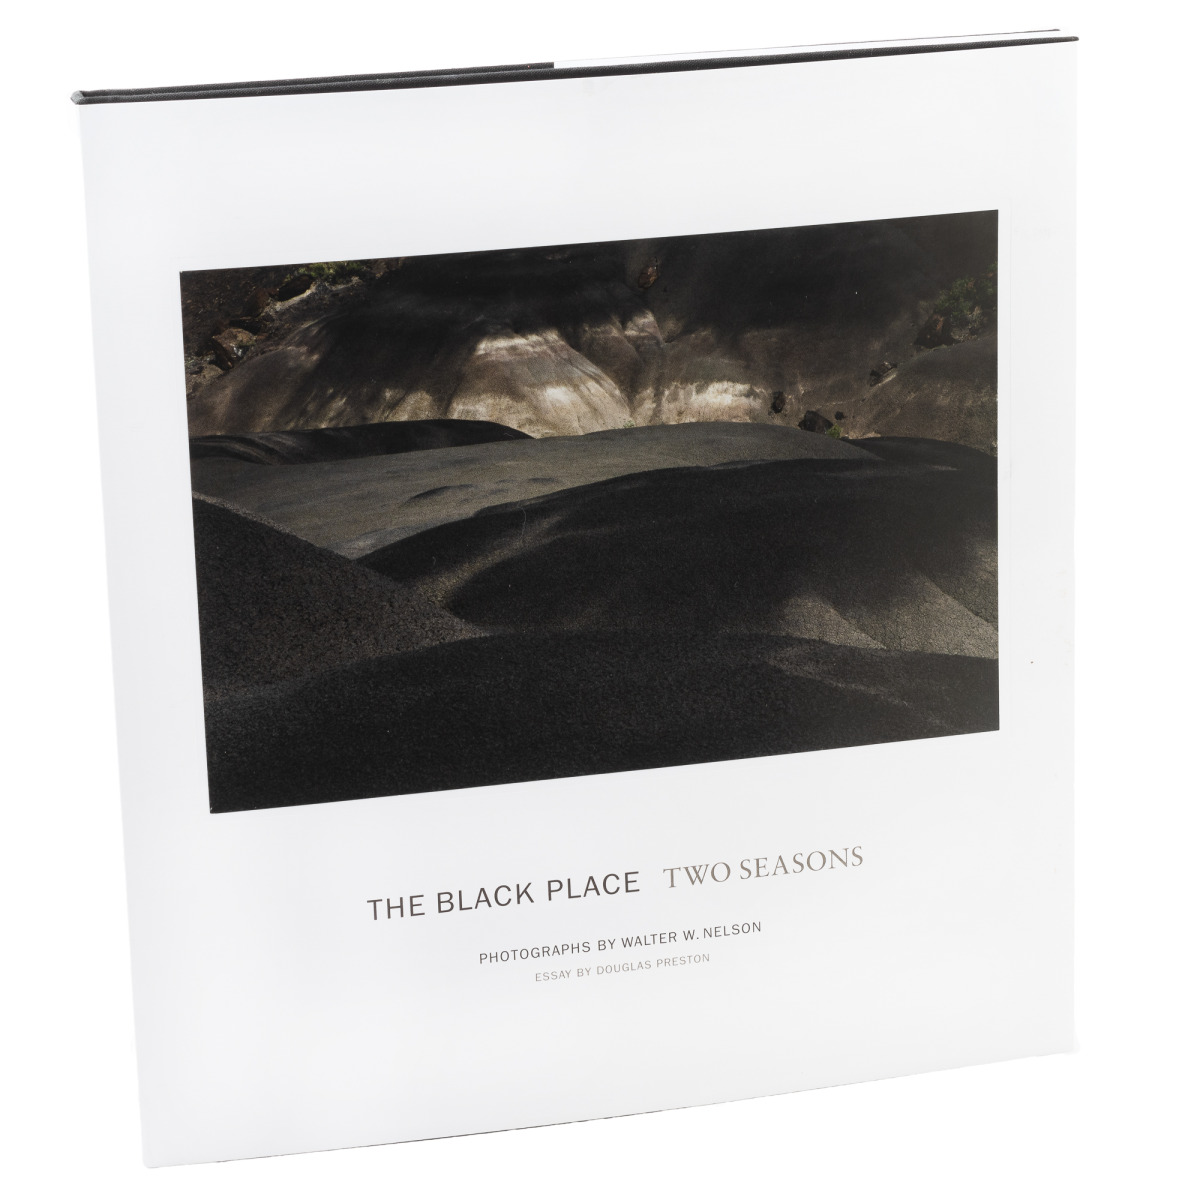 The Black Place, Two Seasons by Walter W. Nelson